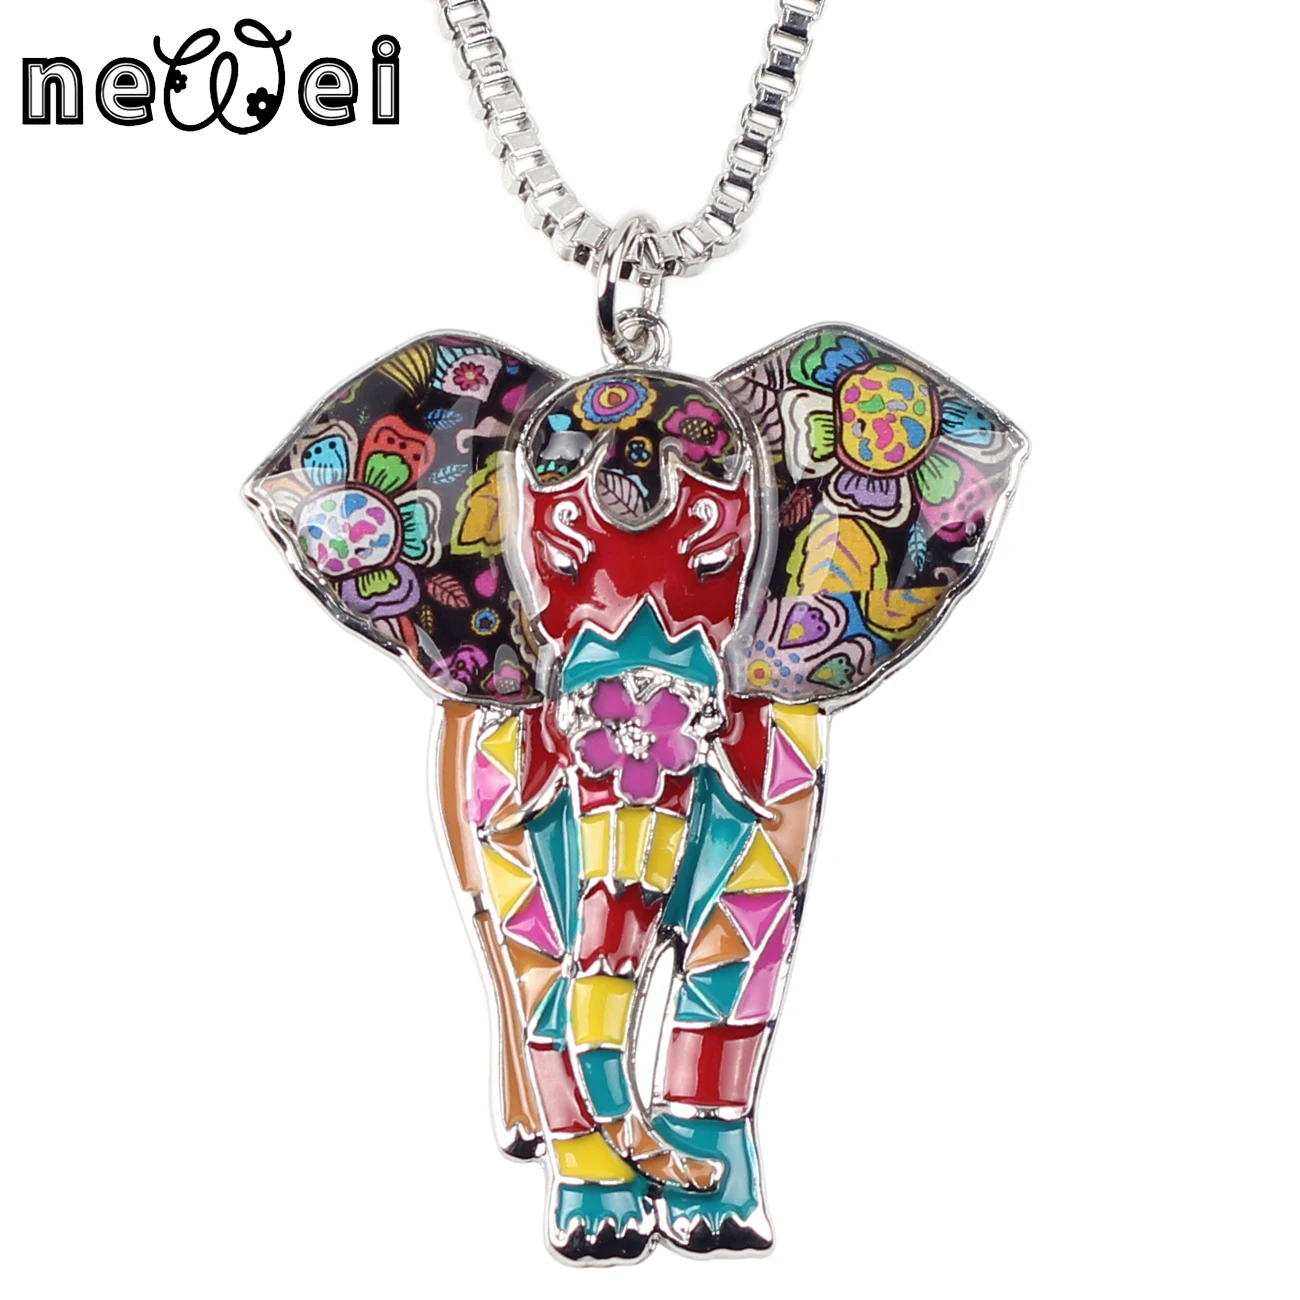 

NEWEI Enamel Alloy Fashion Jewelry Women Animals Charms Gifts Jungle Elephant Necklace Pendant, Multicolor blue black red white brown